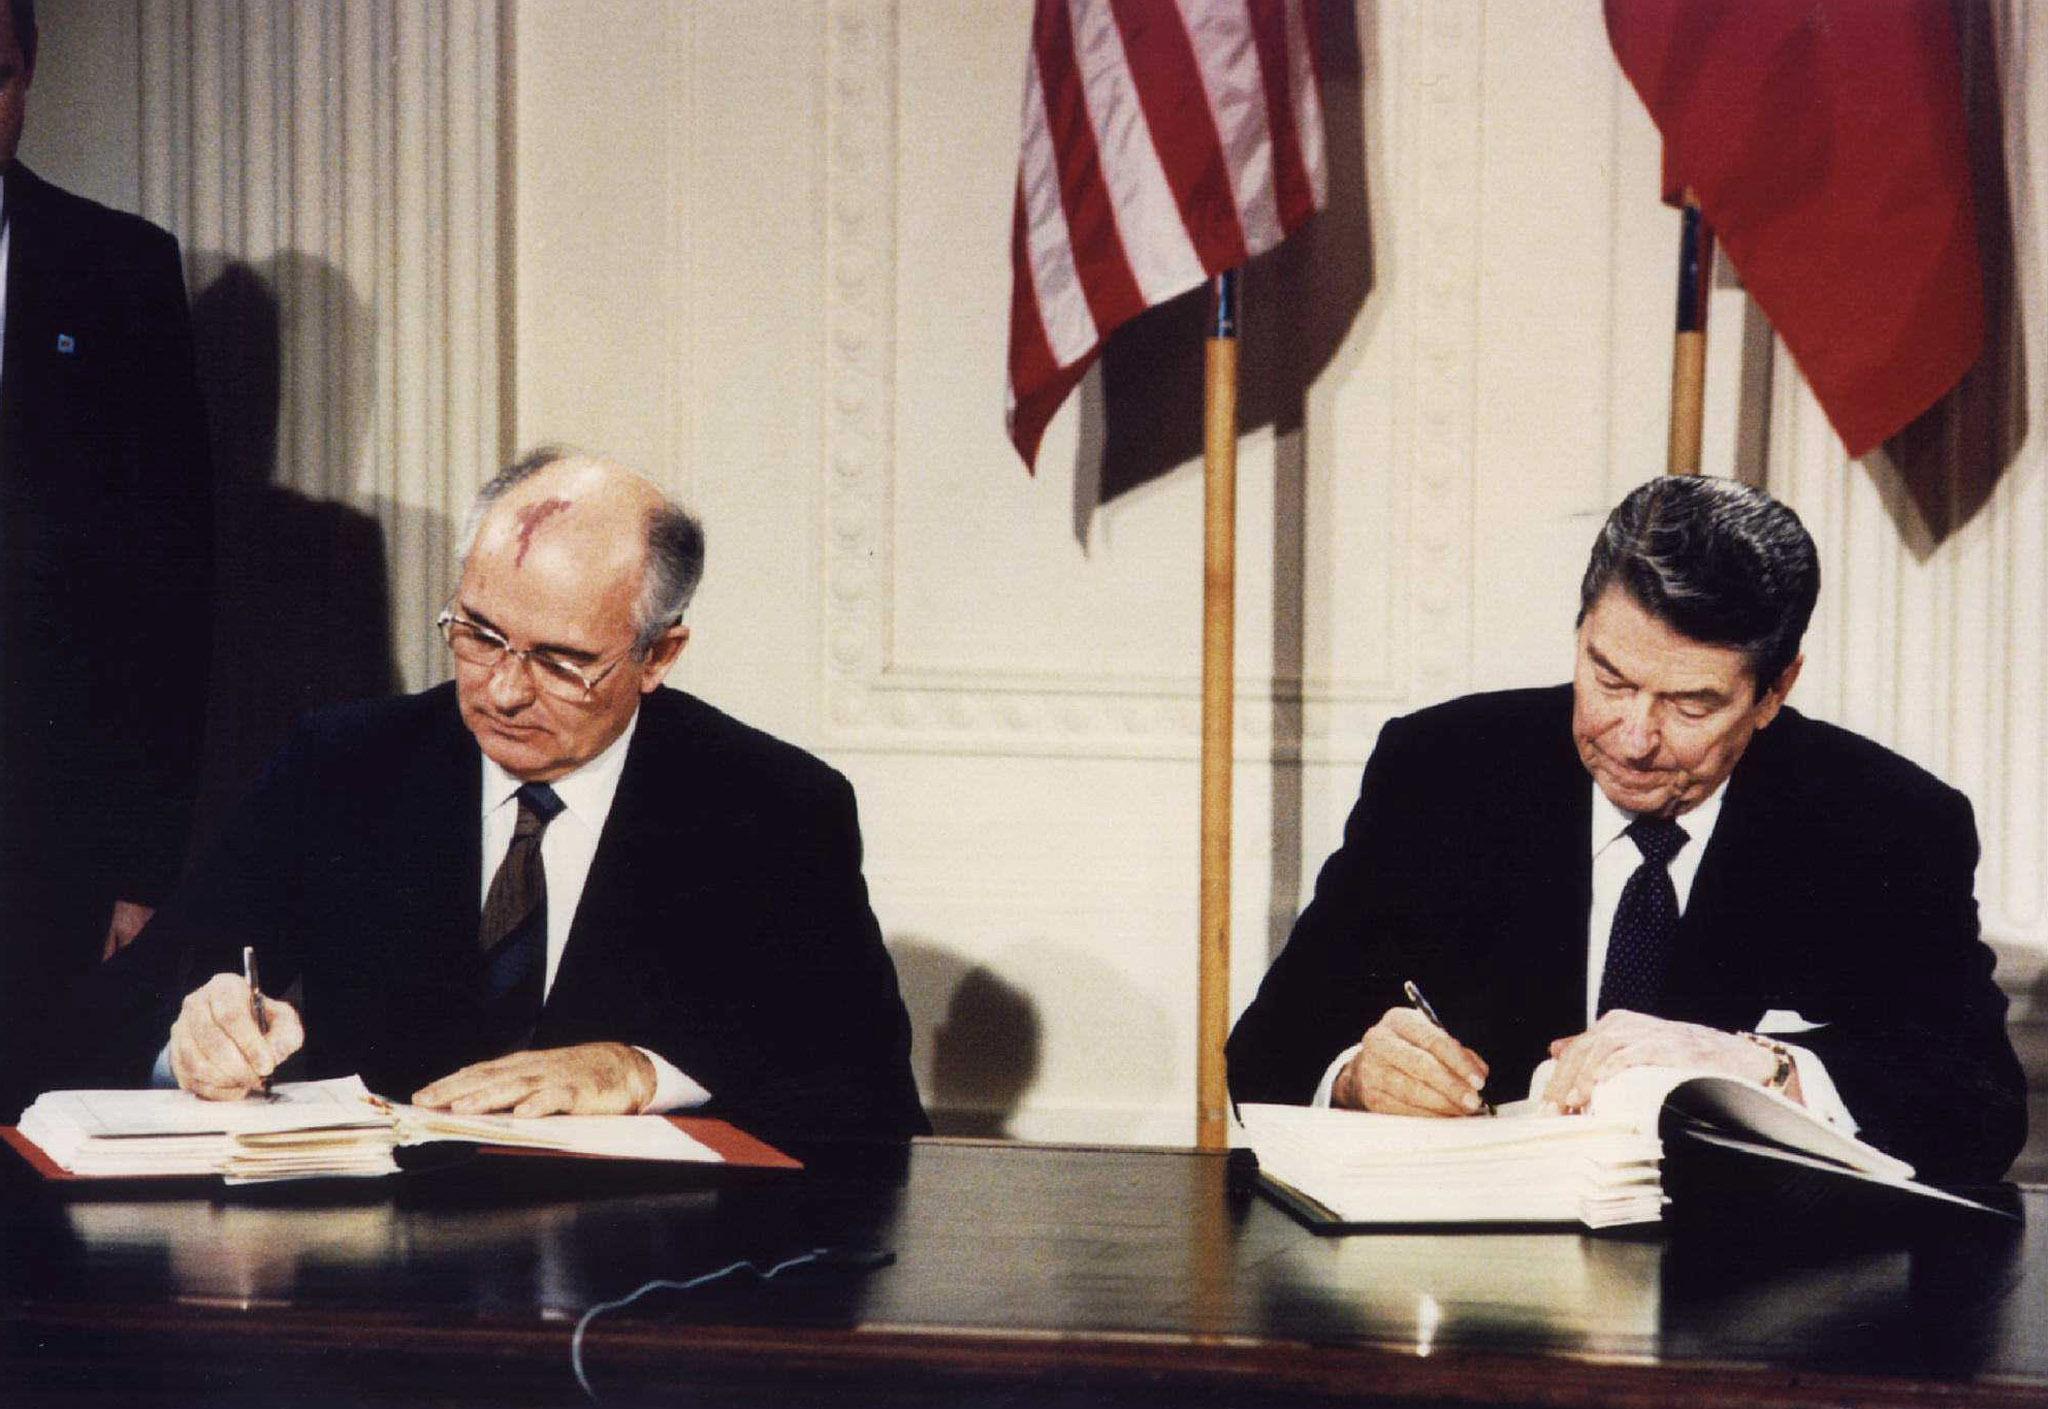 Soviet president Mikhail Gorbachev and US president Ronald Reagan signing the Intermediate-Range Nuclear Forces Treaty at the White House on 8 December 1987